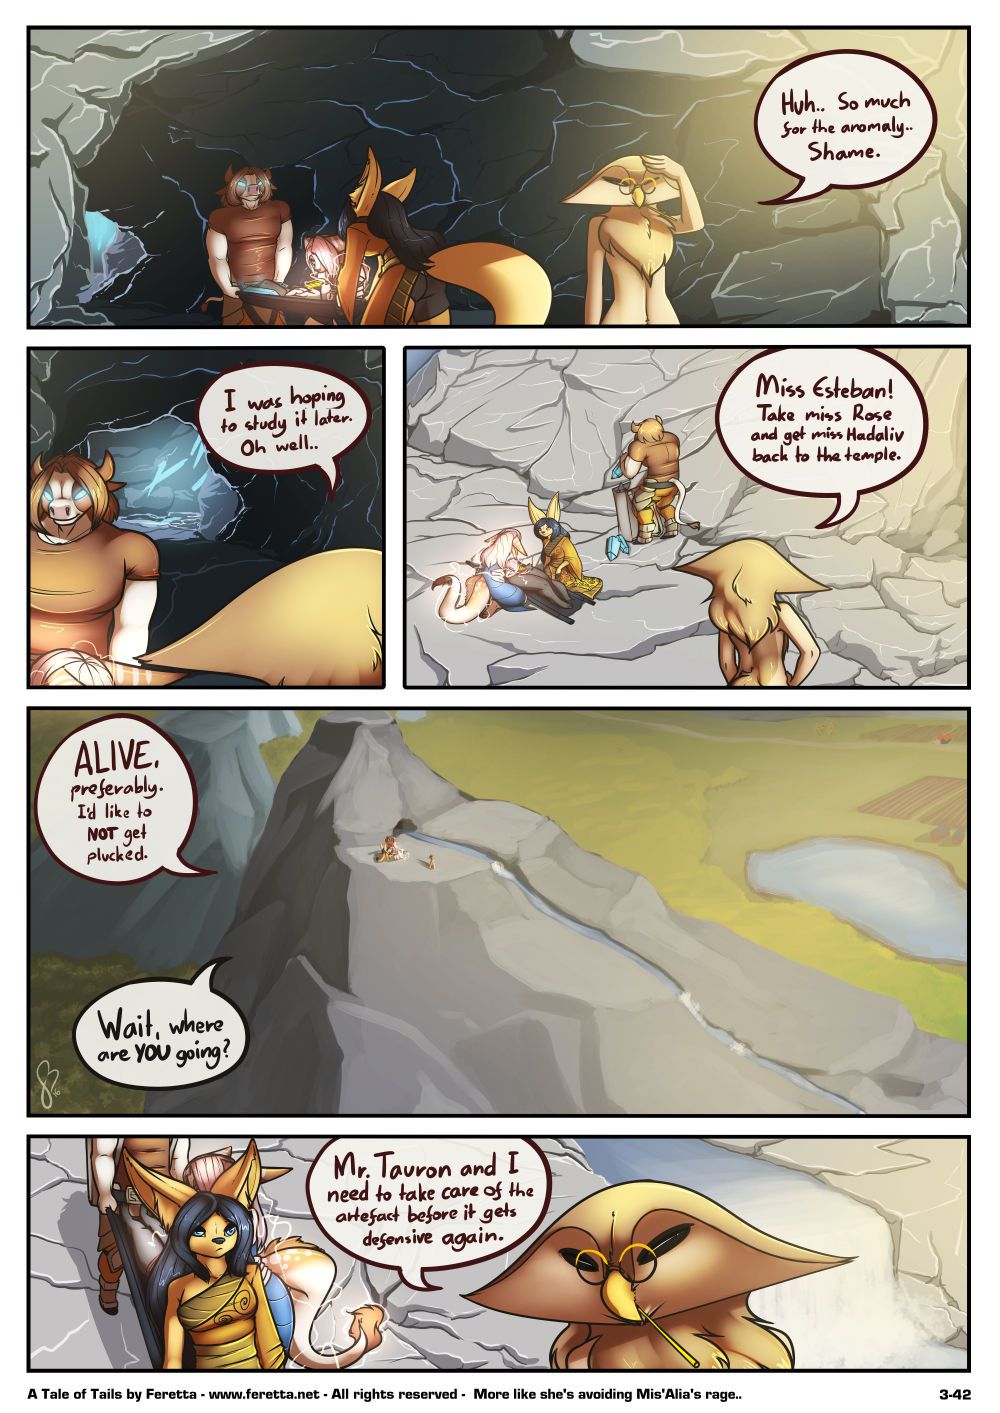 [Feretta] Farellian Legends: A Tale of Tails (w/Extras) [Ongoing] 131